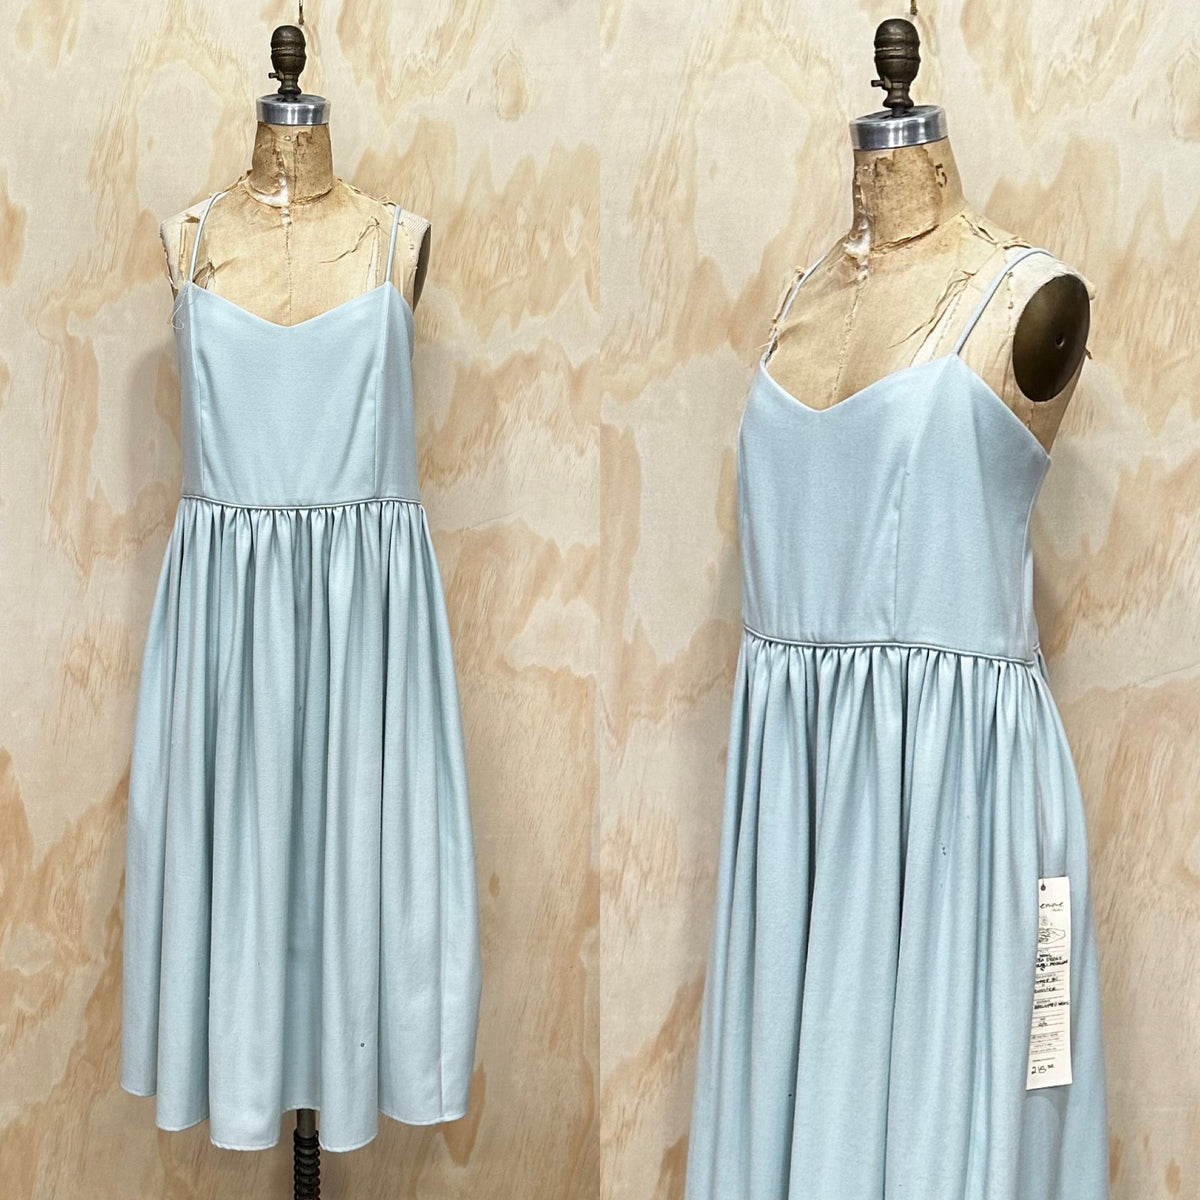 Baby Blue Handcrafted Tea Dress • Made in Vancouver Canada  • 100% reclaimed wool cotton